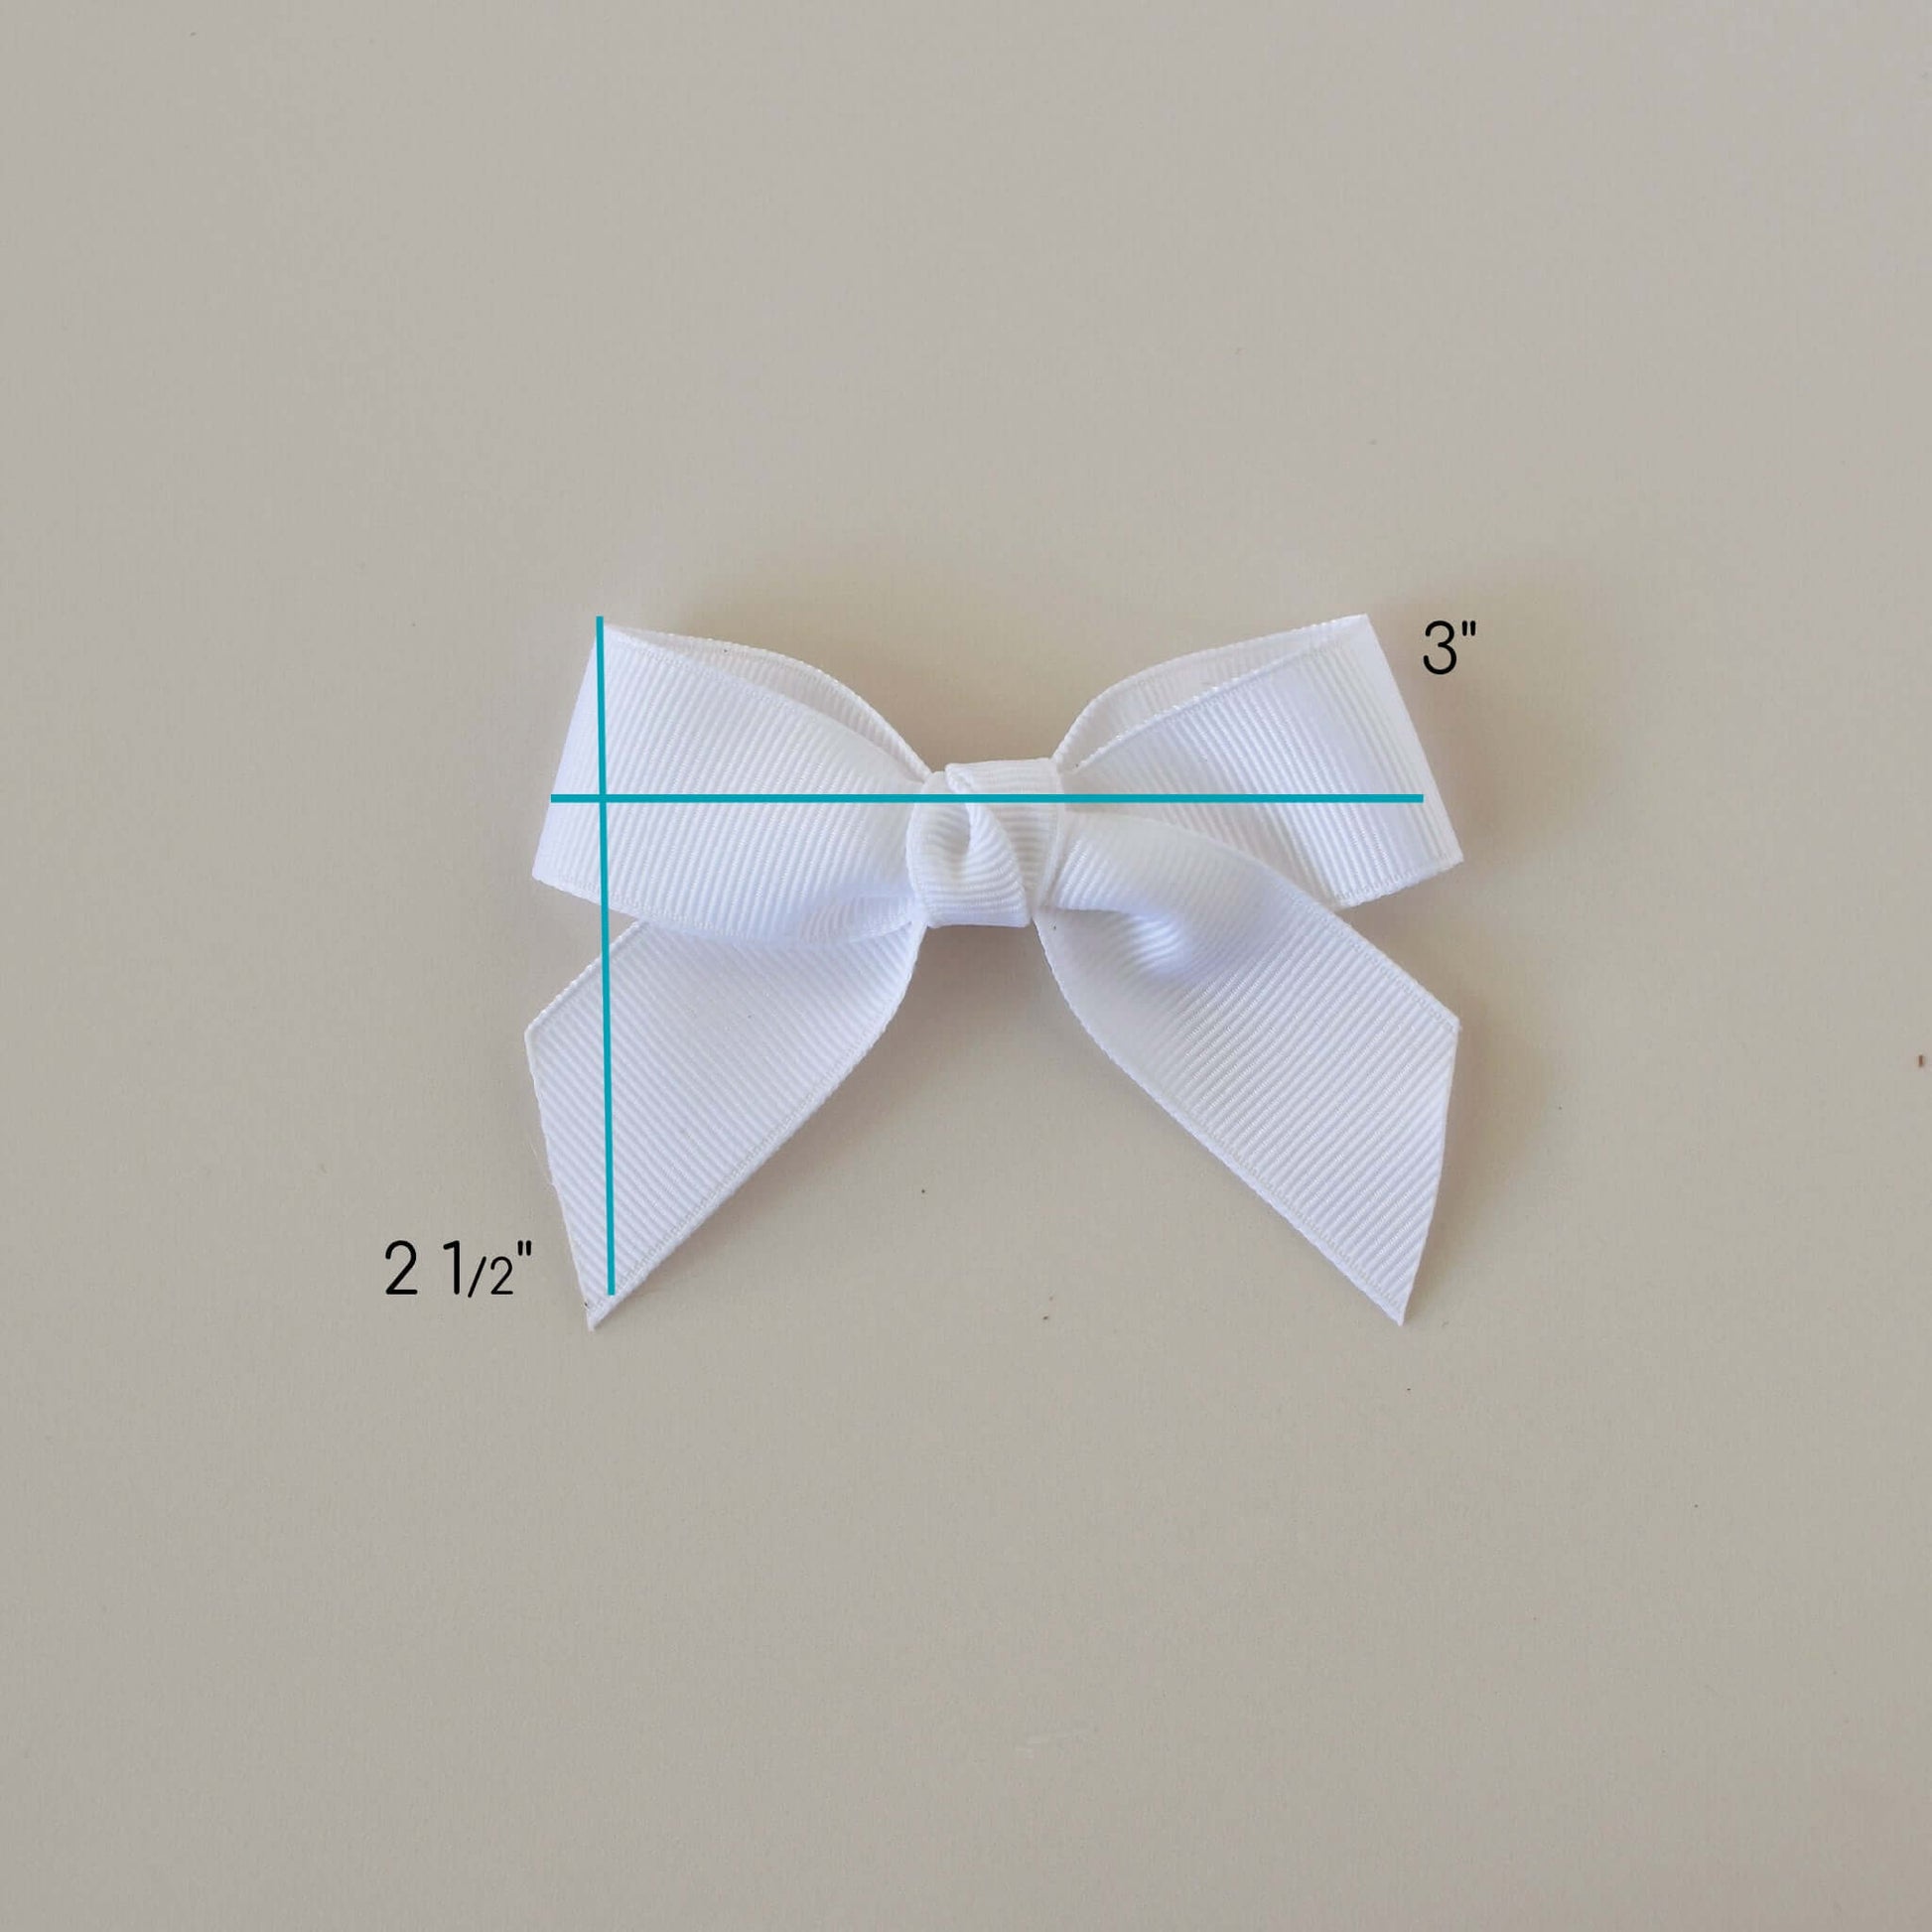 3 inch white grosgrain sailor bow clip with measurements 3"W x 2.5"H, perfect for babies and toddlers, shown on a neutral background.